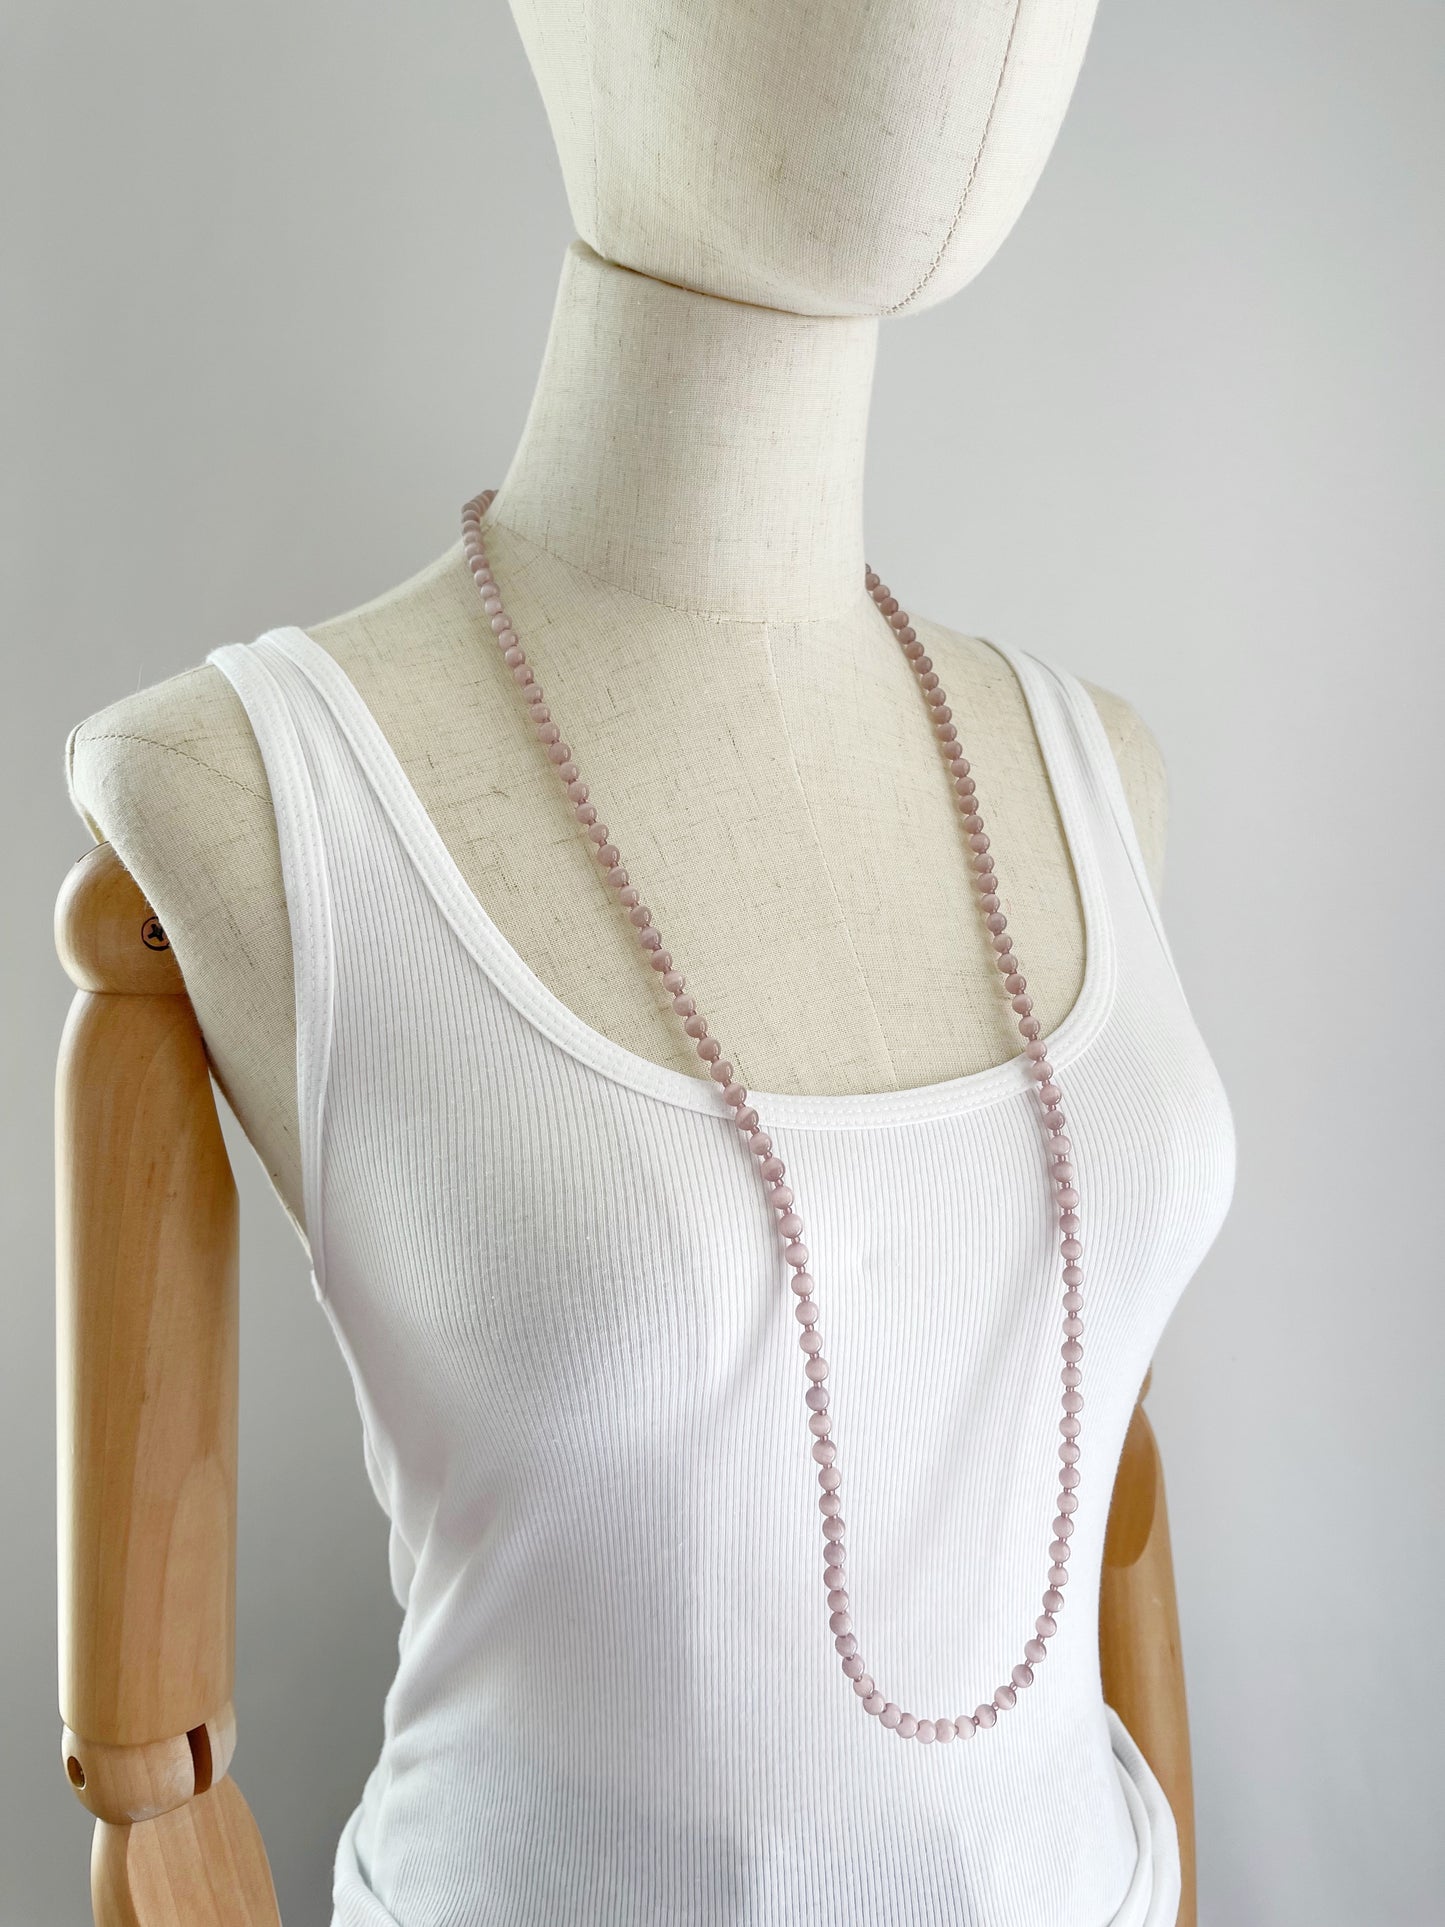 B. 38” Long & double-able necklace of Mauve Cat’s Eye Glass